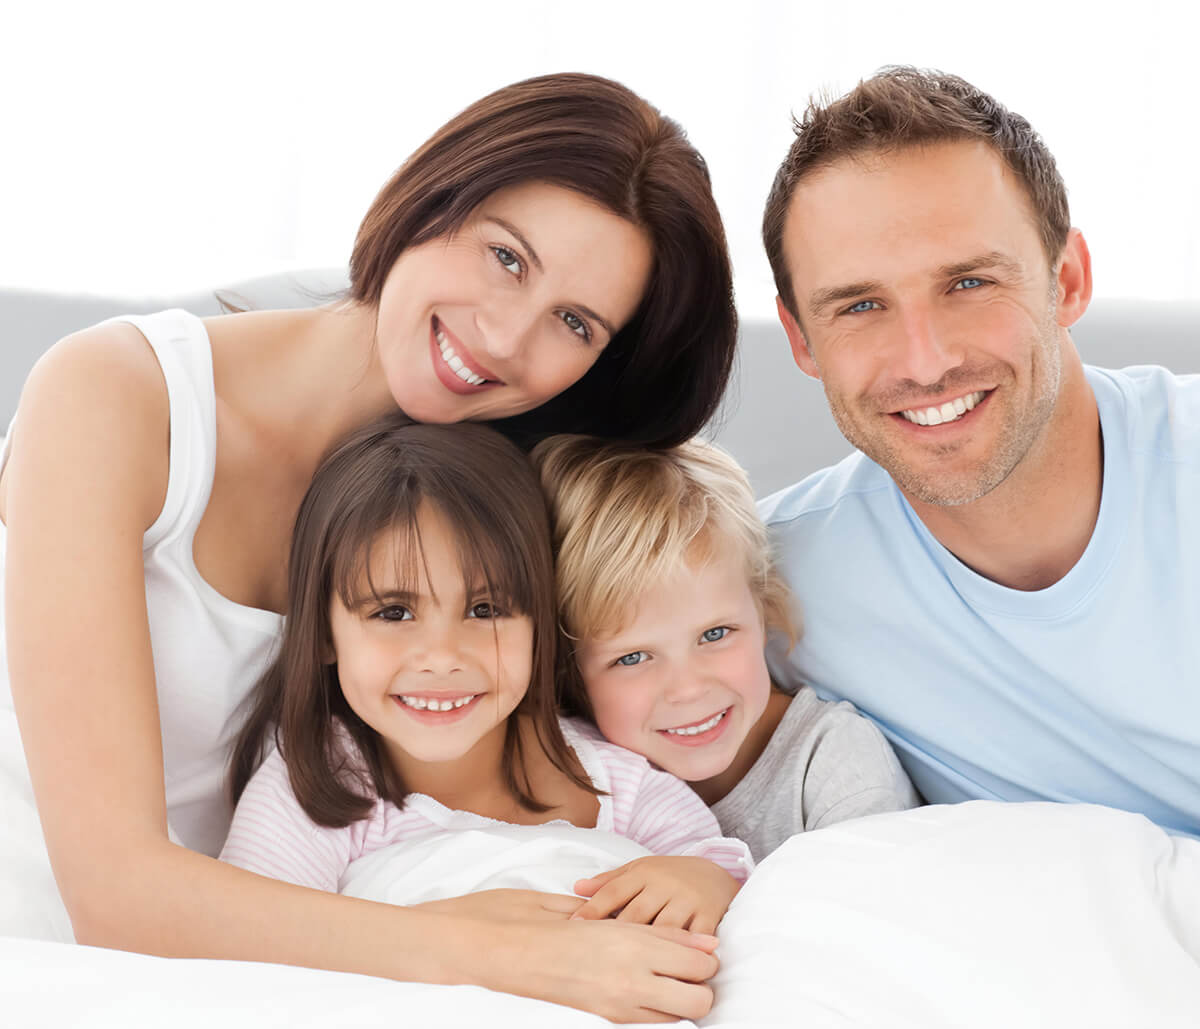 Where Can I Find Family-friendly Dental Care in the Kirkland, WA Community